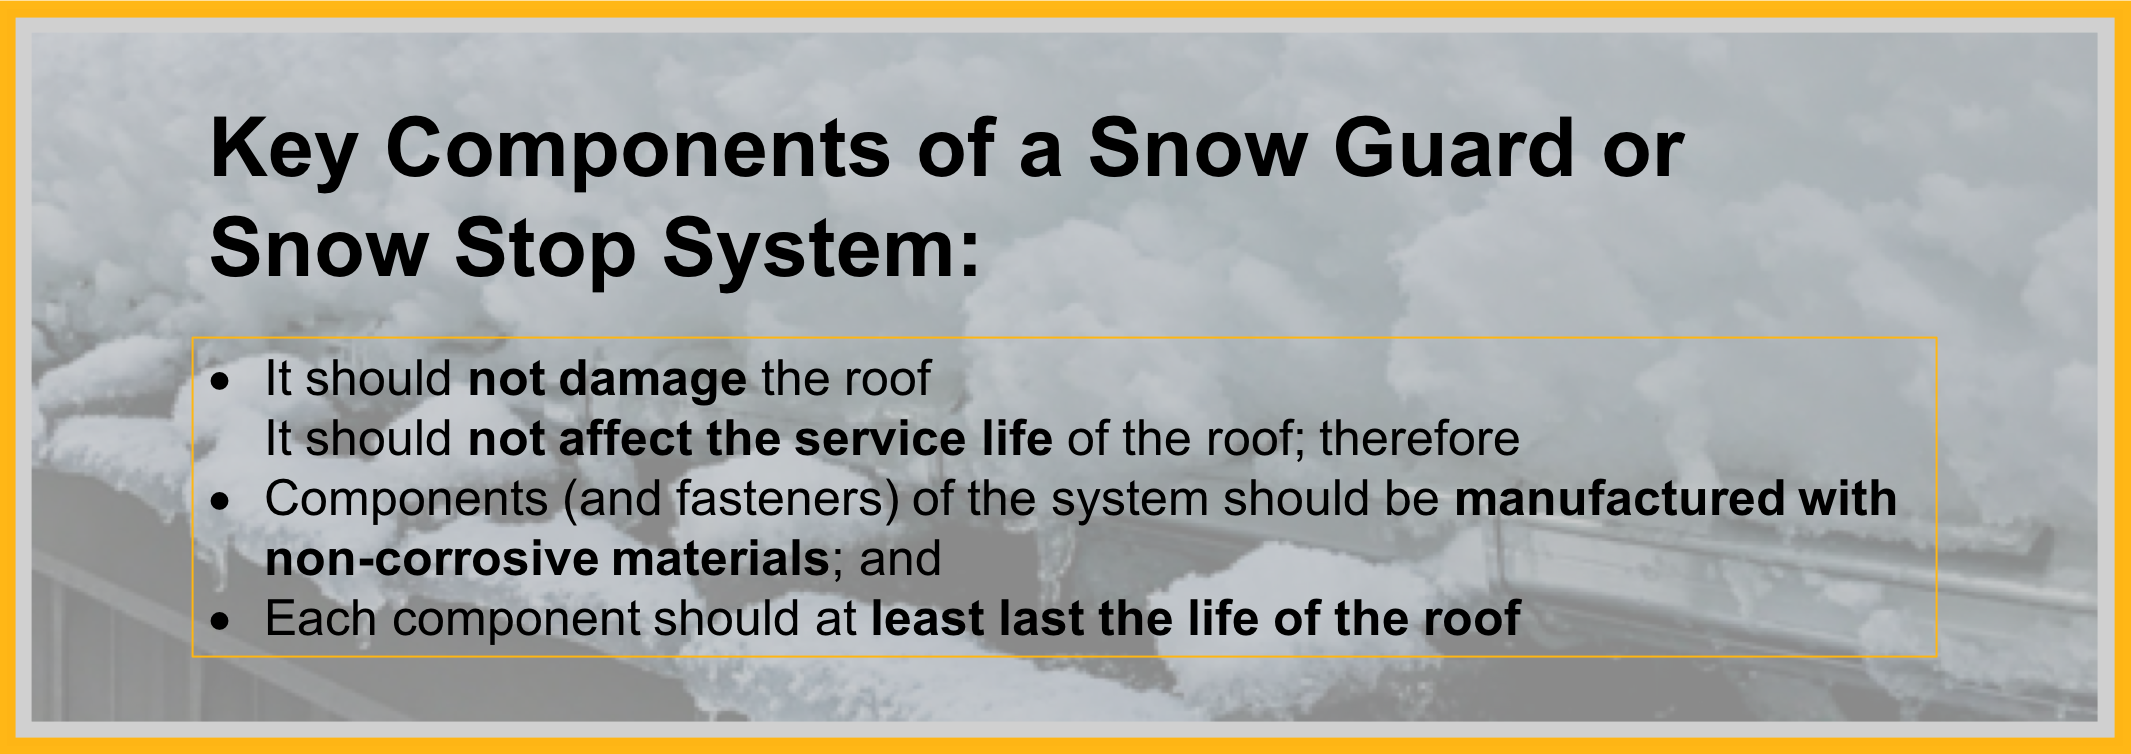 Components of a Snow Guard or Snow Stop System